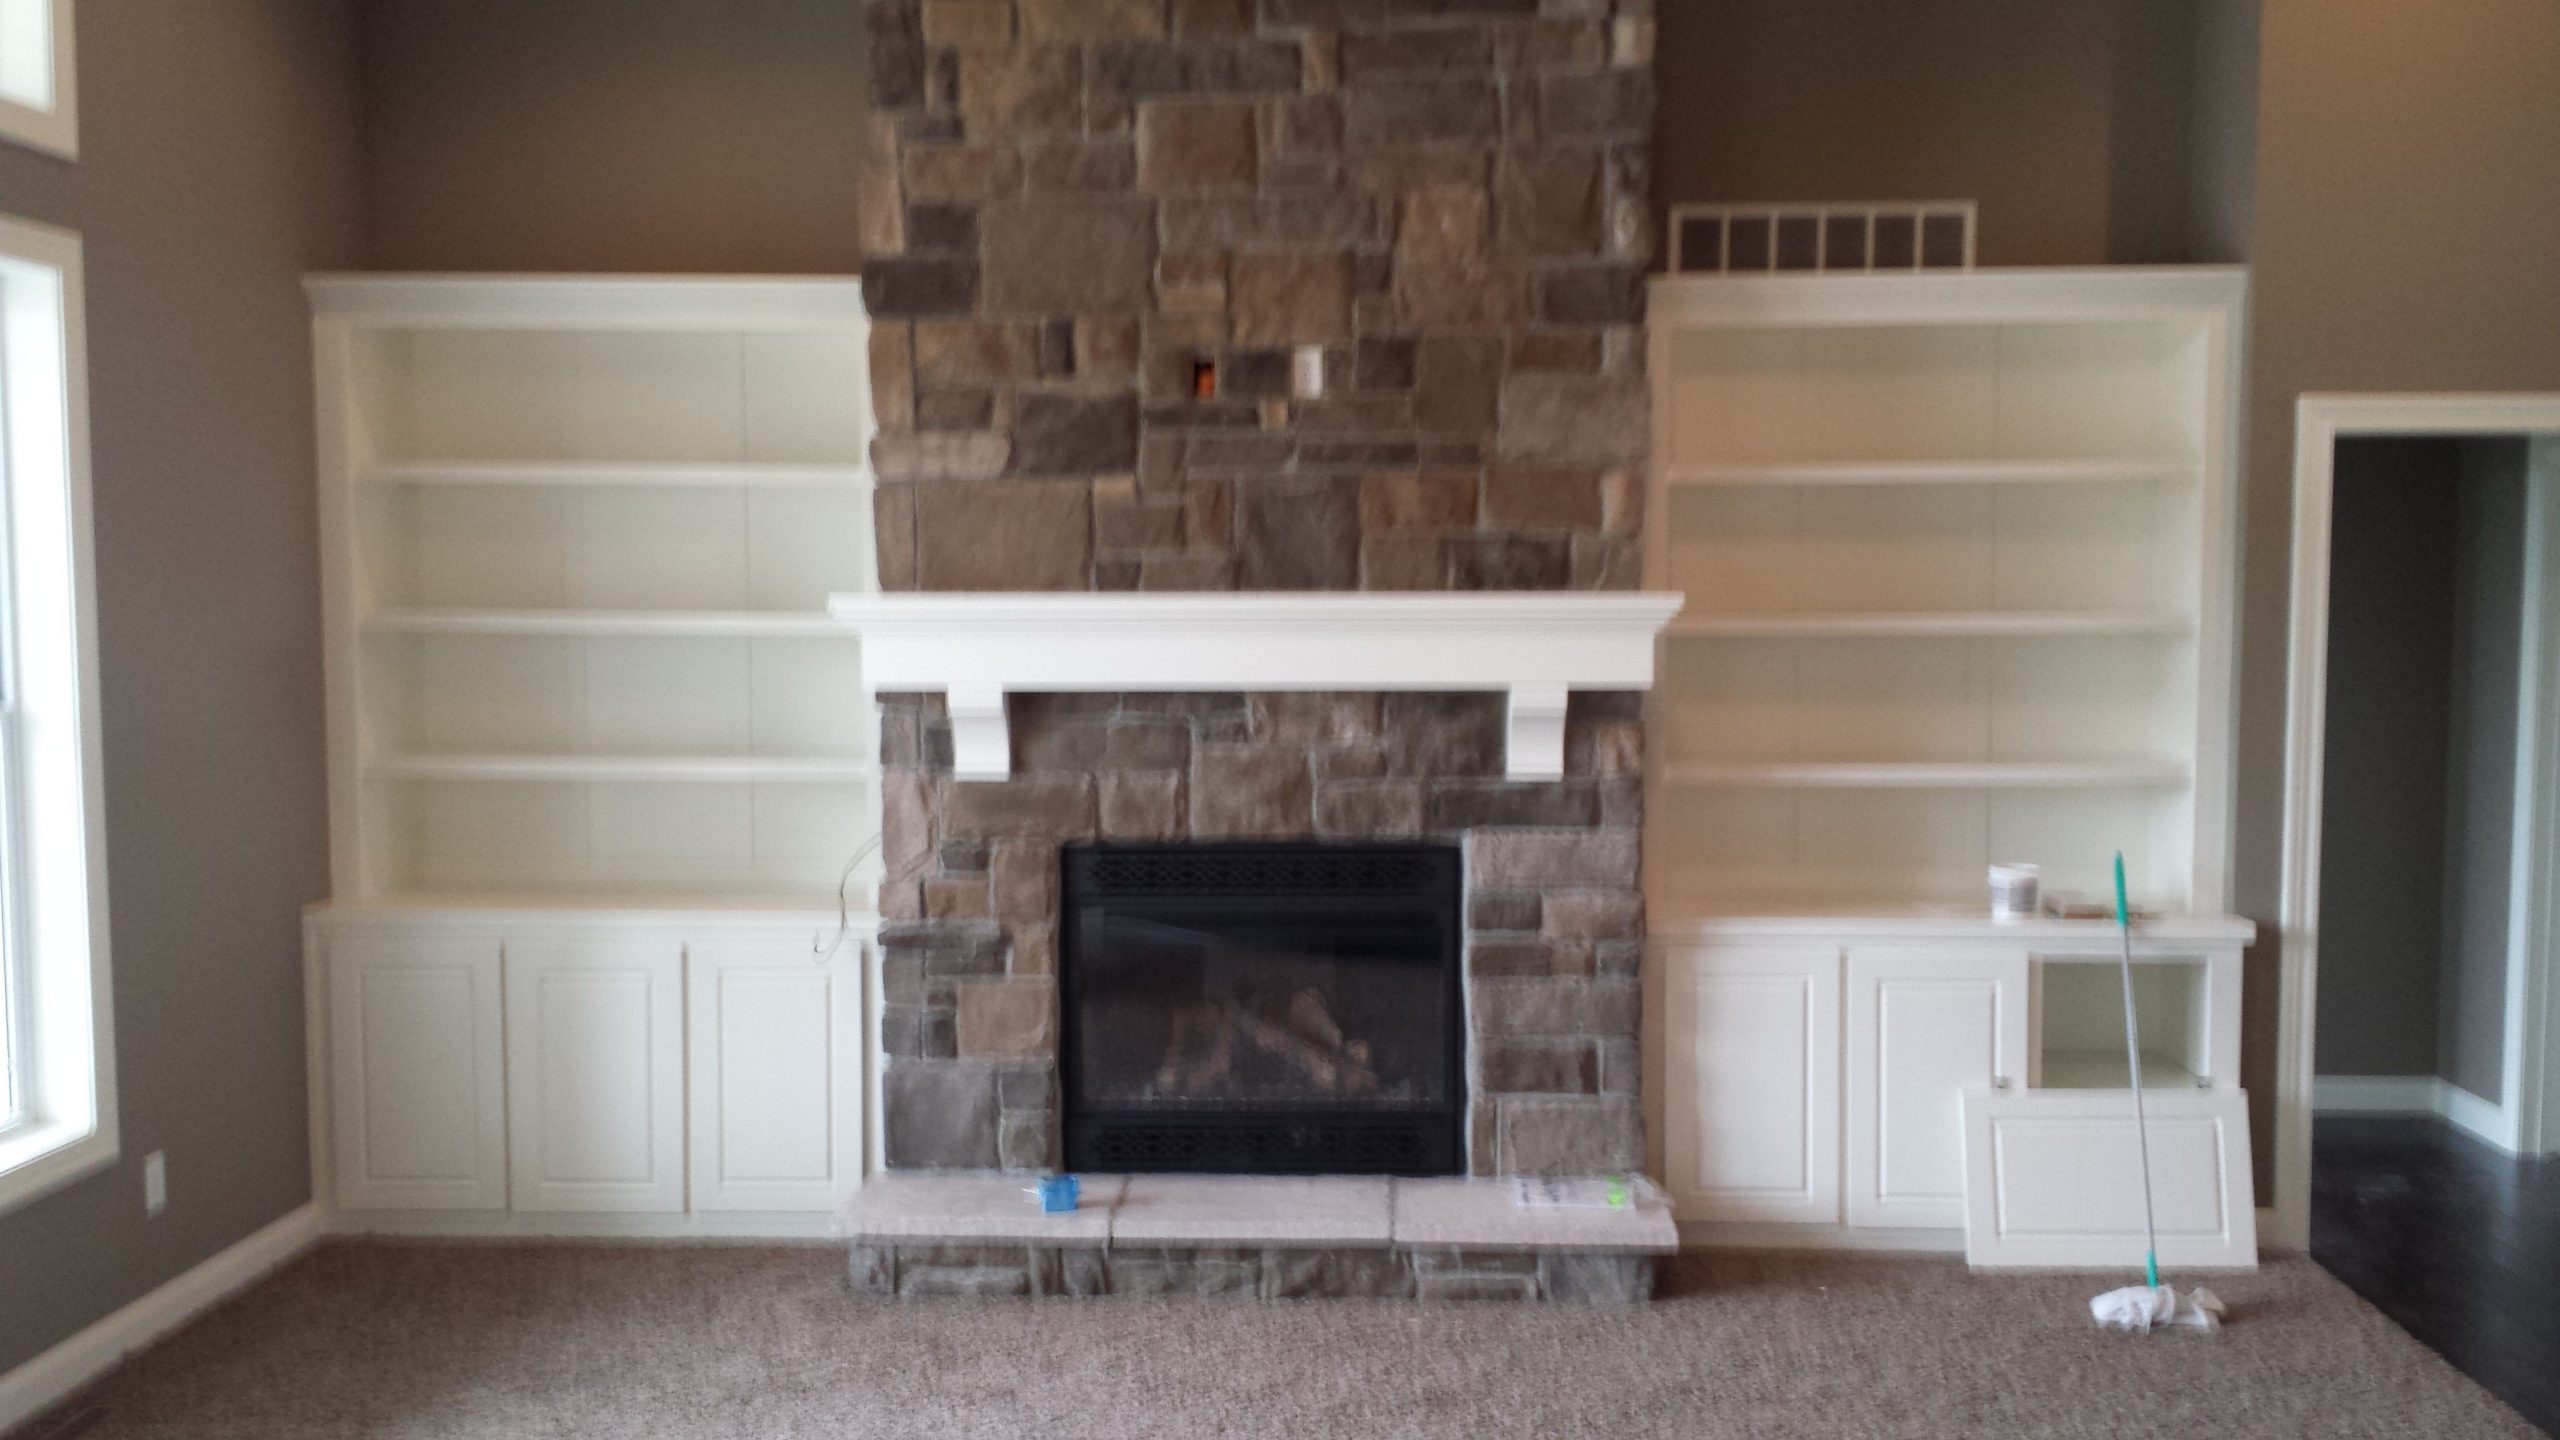 Custom Wood Built Ins Around Fireplace With Shelving And pertaining to measurements 4128 X 2322